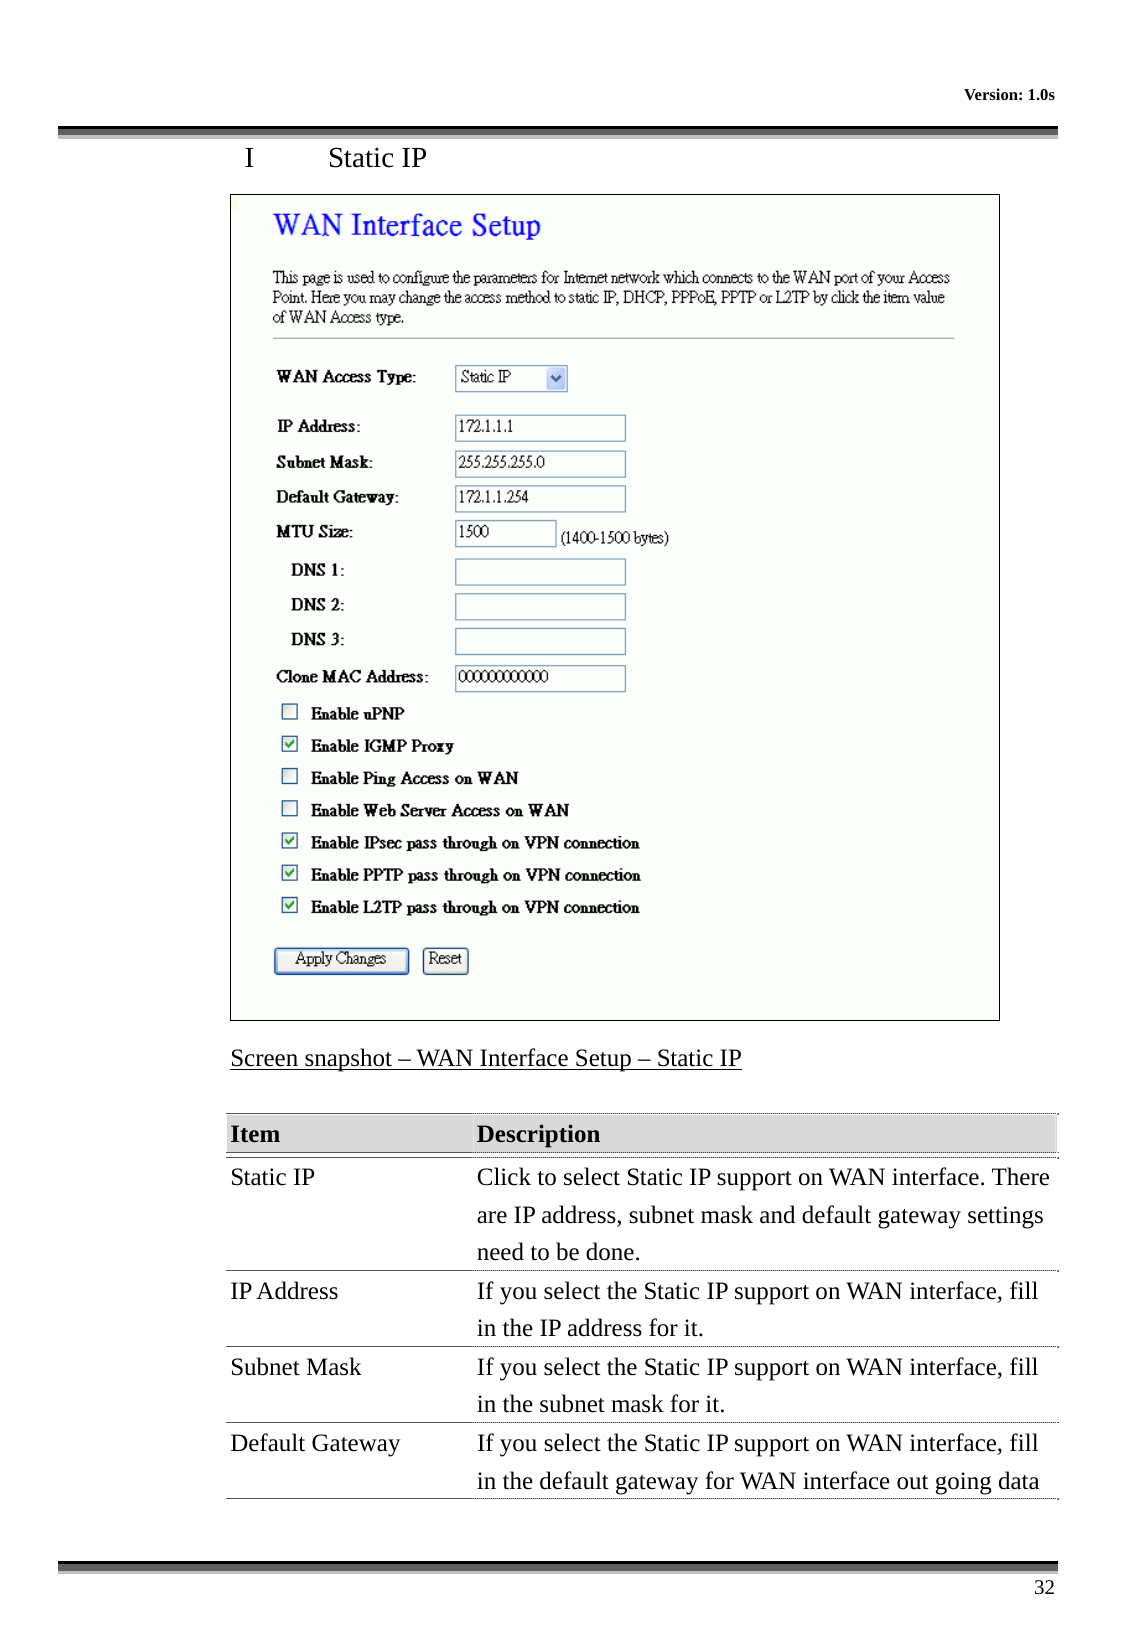     Version: 1.0s      32 I  Static IP  Screen snapshot – WAN Interface Setup – Static IP  Item  Description   Static IP  Click to select Static IP support on WAN interface. There are IP address, subnet mask and default gateway settings need to be done. IP Address  If you select the Static IP support on WAN interface, fill in the IP address for it. Subnet Mask  If you select the Static IP support on WAN interface, fill in the subnet mask for it. Default Gateway  If you select the Static IP support on WAN interface, fill in the default gateway for WAN interface out going data 